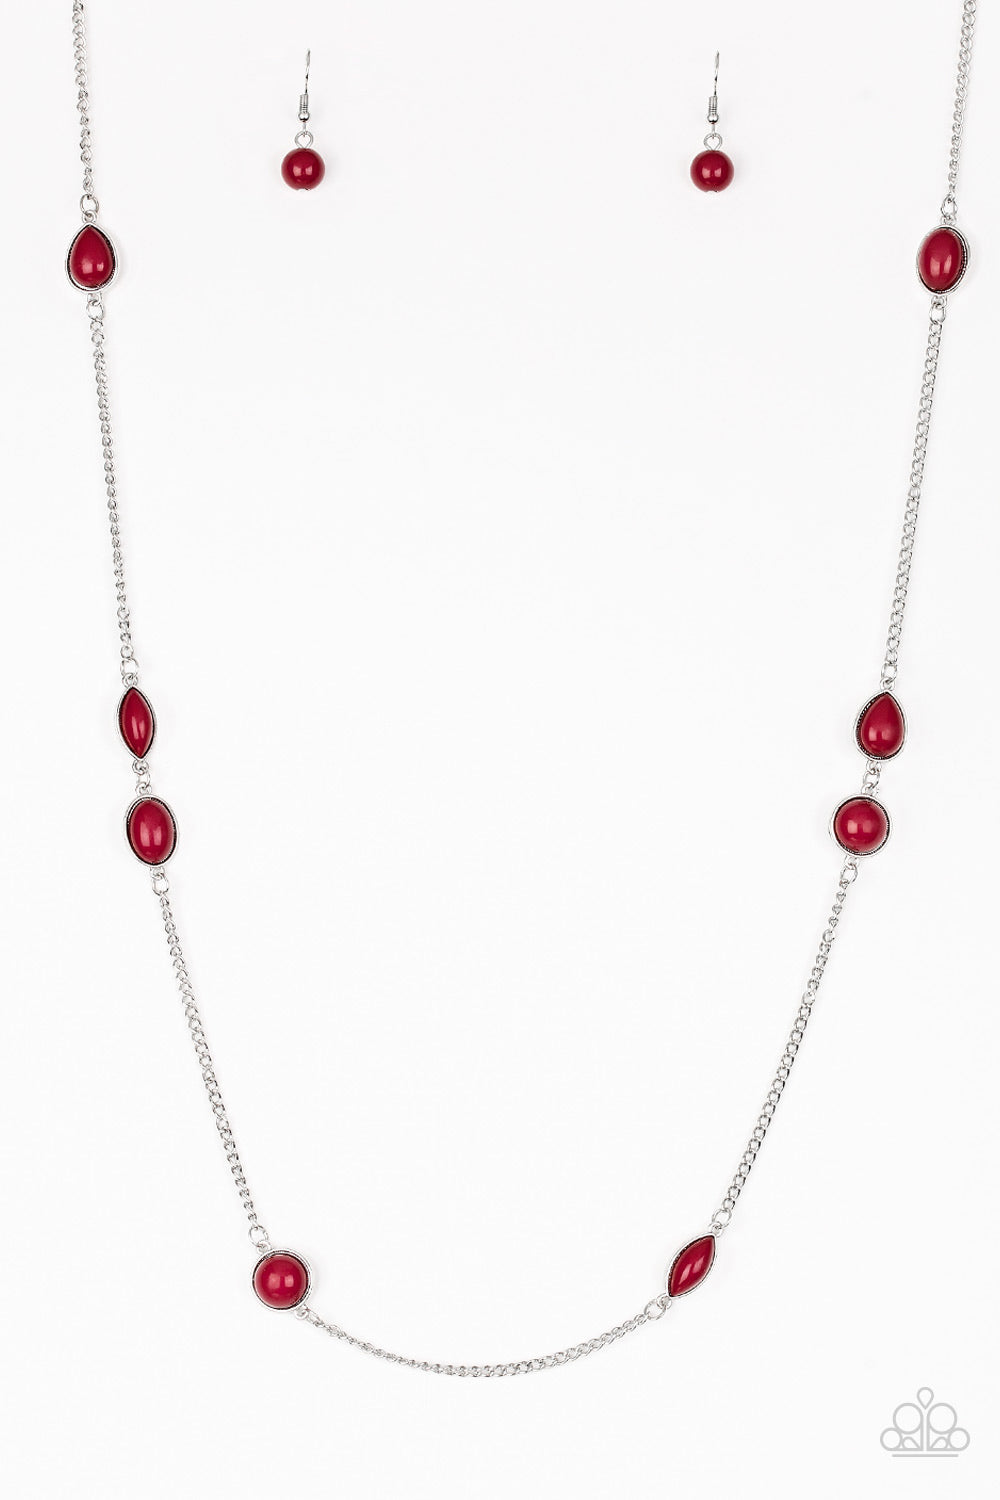 Pacific Piers - Red and Silver Necklace - Paparazzi Accessories - Featuring round and teardrop shapes, rich red beading trickles along an elongated silver chain for a seasonal look. Features an adjustable clasp closure. Sold as one individual necklace.